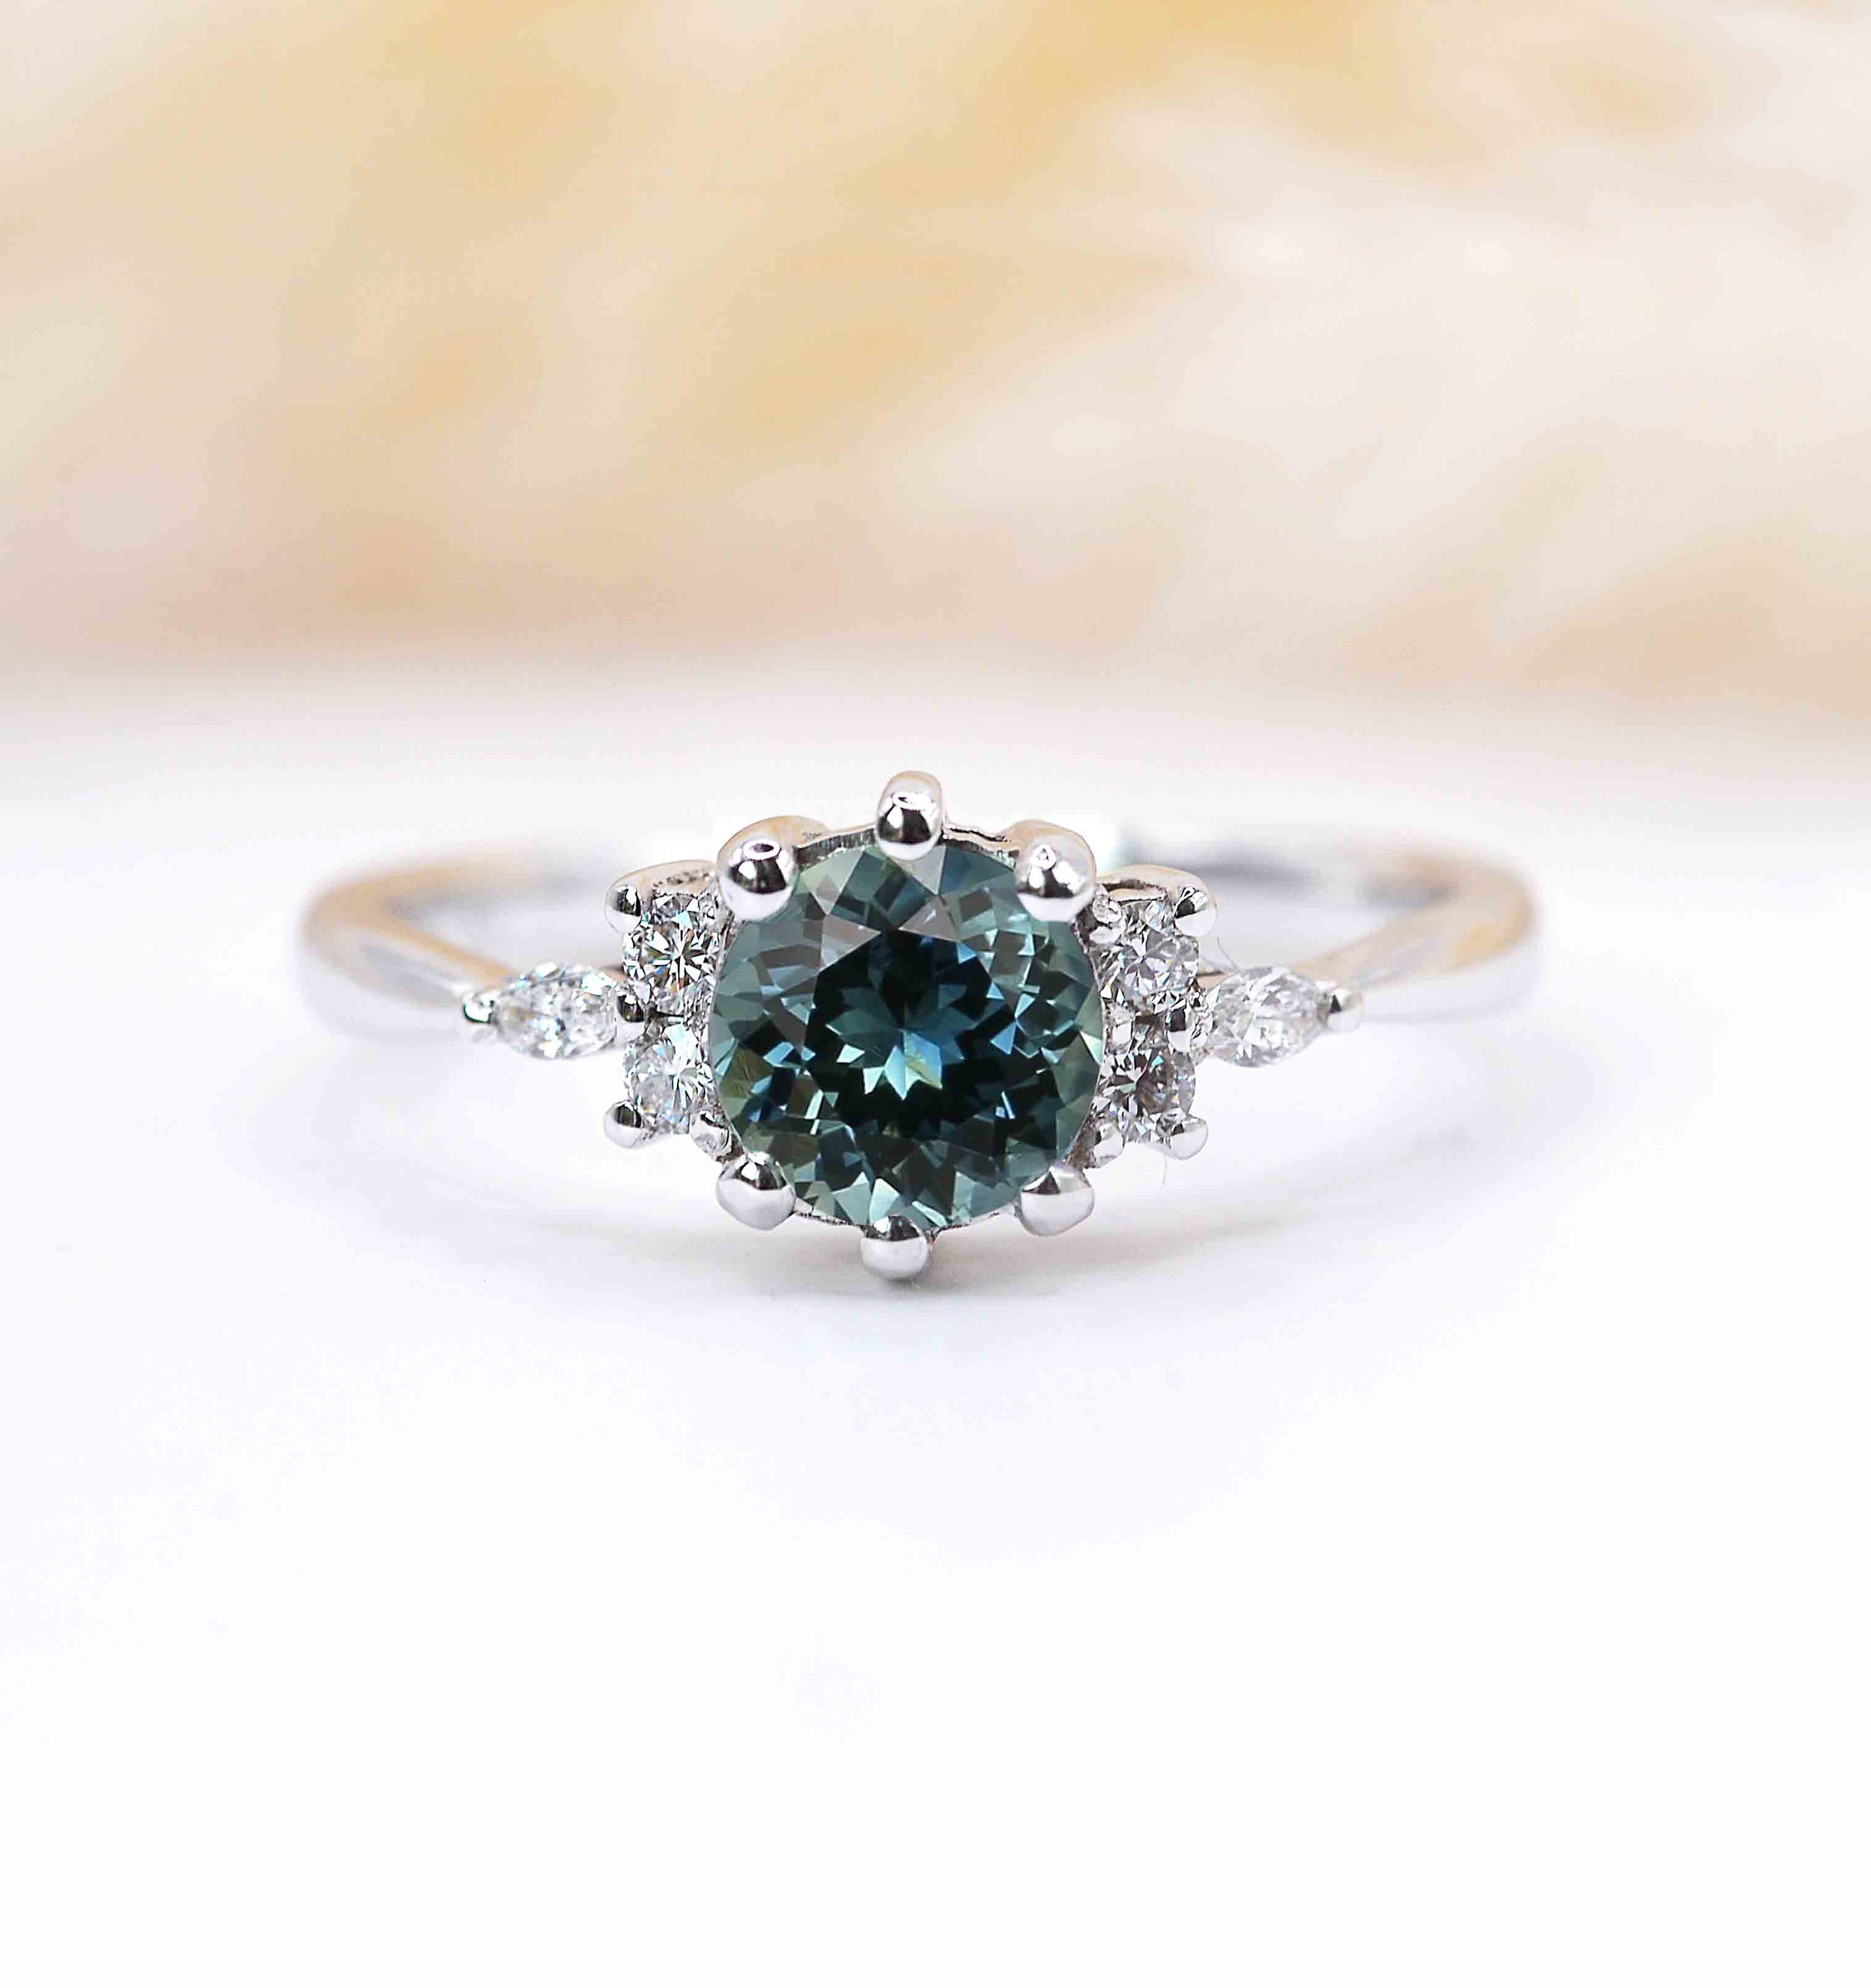 Natural Teal Sapphire & Diamond Ring | Featuring Art Deco Solid White Gold Celebrity Vintage Stylish